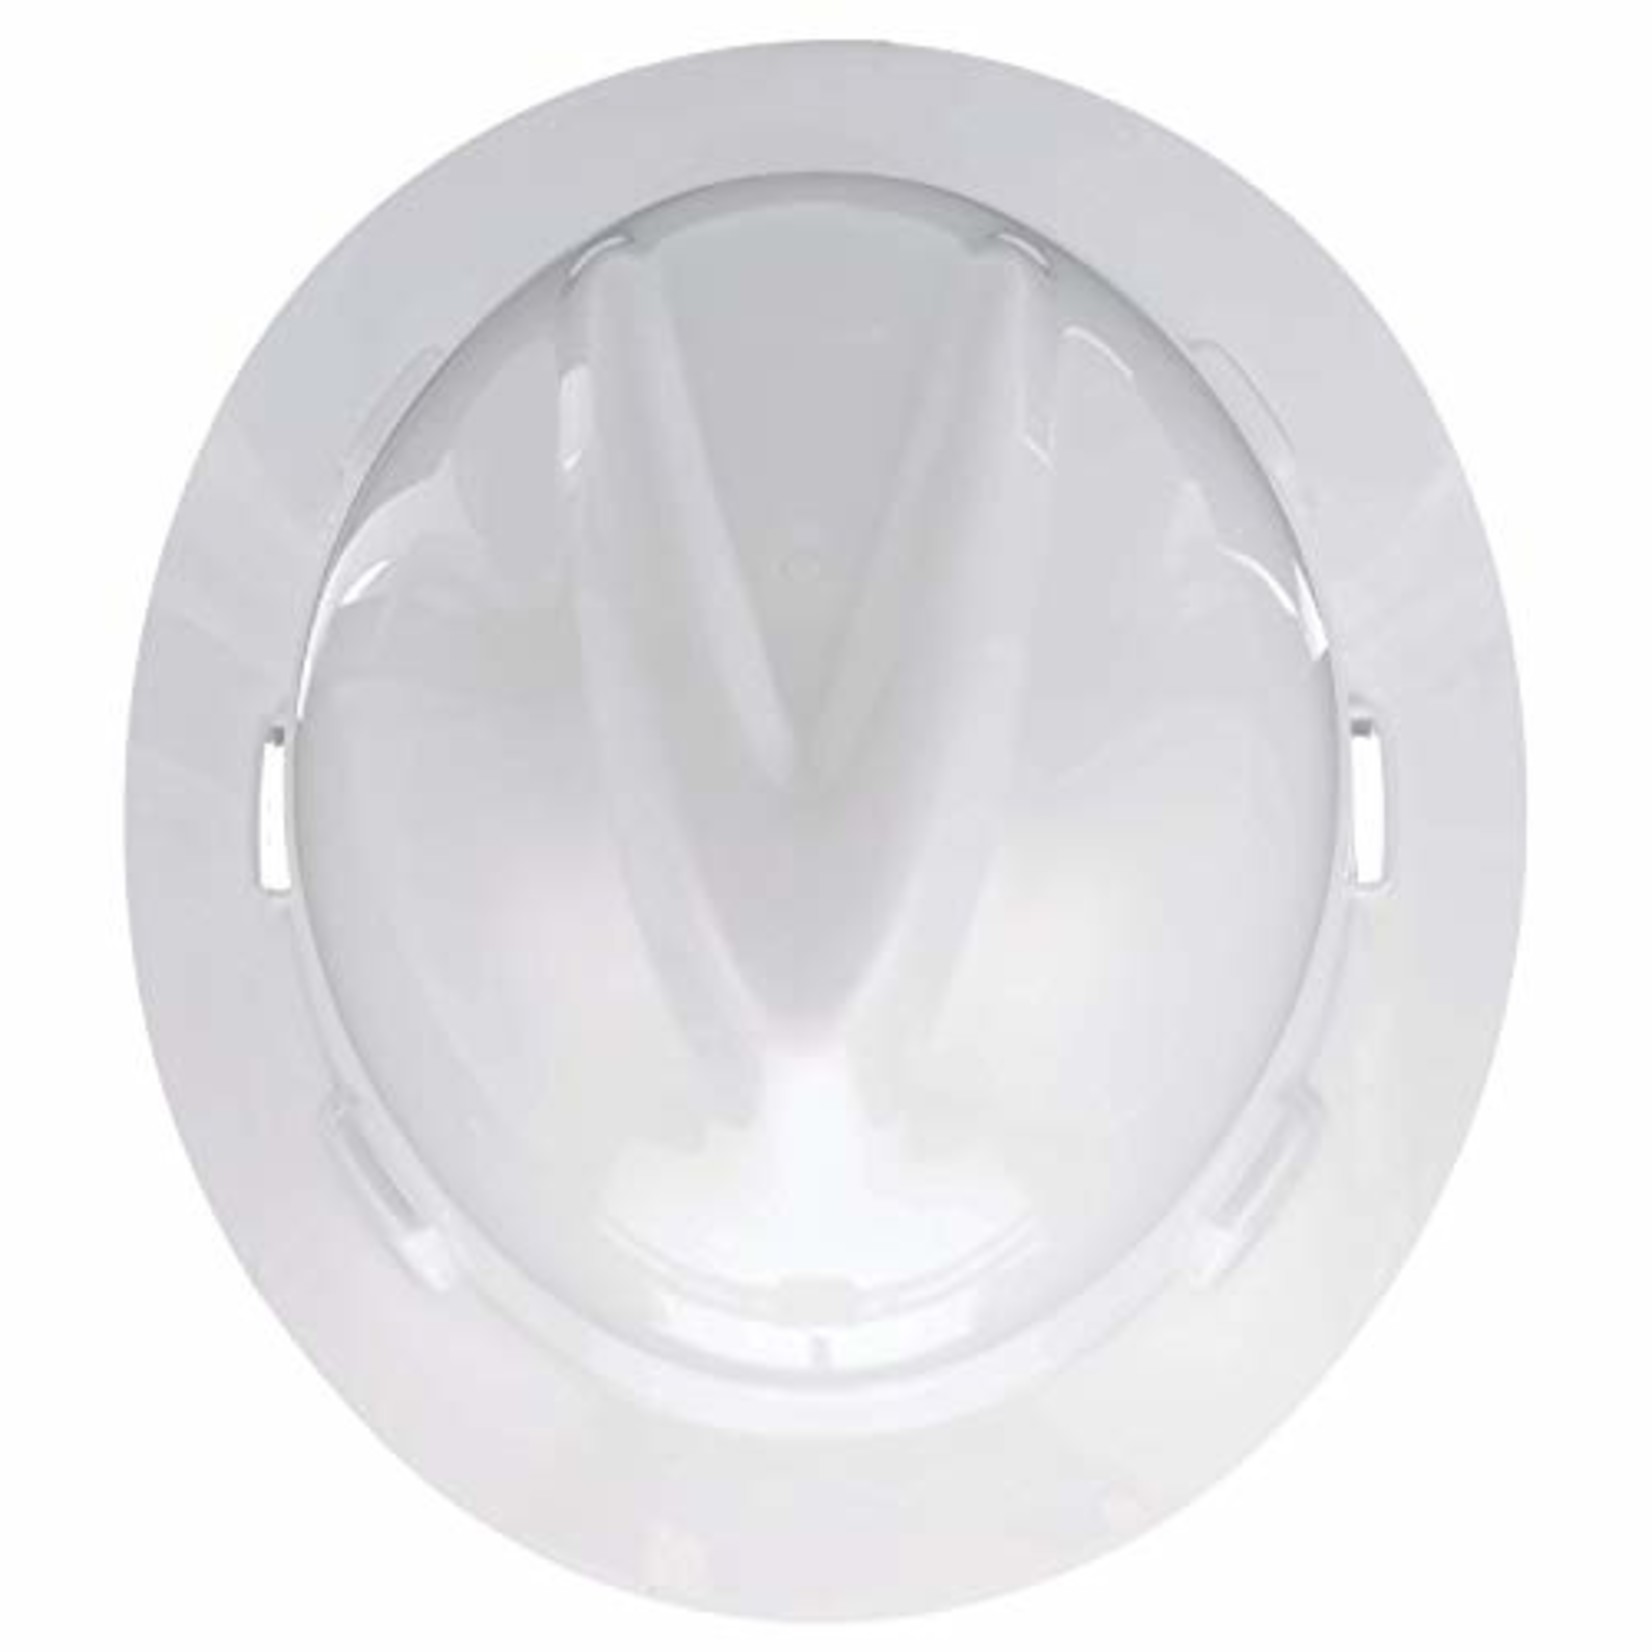 MSA V-Gard Slotted Protective Hard Hat with Fas-Trac III Suspension, White (475369)